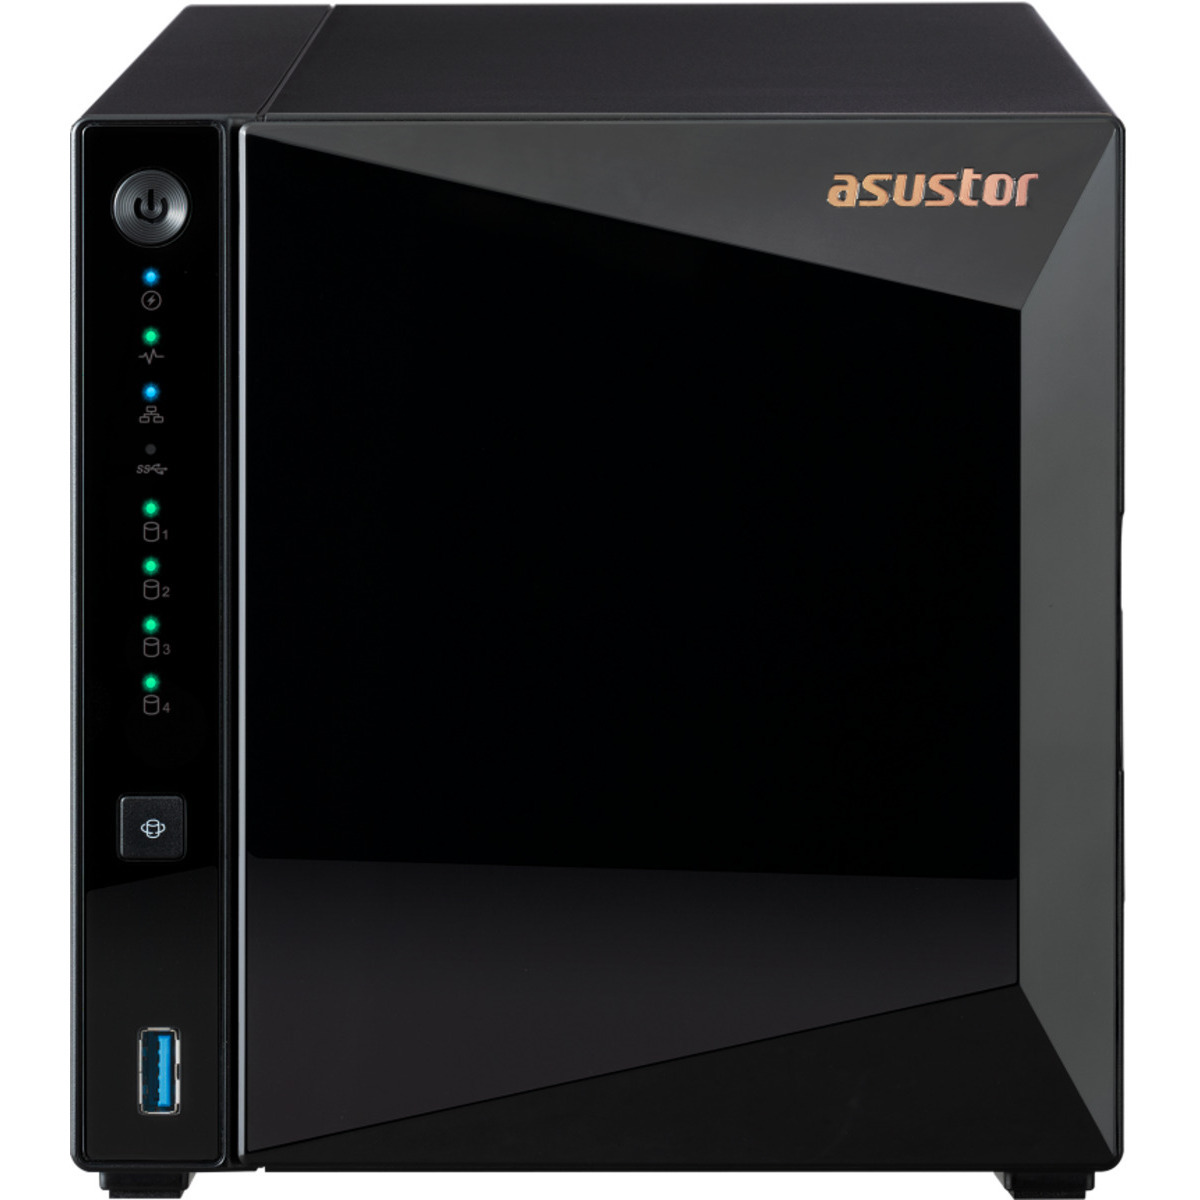 ASUSTOR DRIVESTOR 4 Pro AS3304T 48tb 4-Bay Desktop Personal / Basic Home / Small Office NAS - Network Attached Storage Device 4x12tb Seagate EXOS X18 ST12000NM000J 3.5 7200rpm SATA 6Gb/s HDD ENTERPRISE Class Drives Installed - Burn-In Tested DRIVESTOR 4 Pro AS3304T